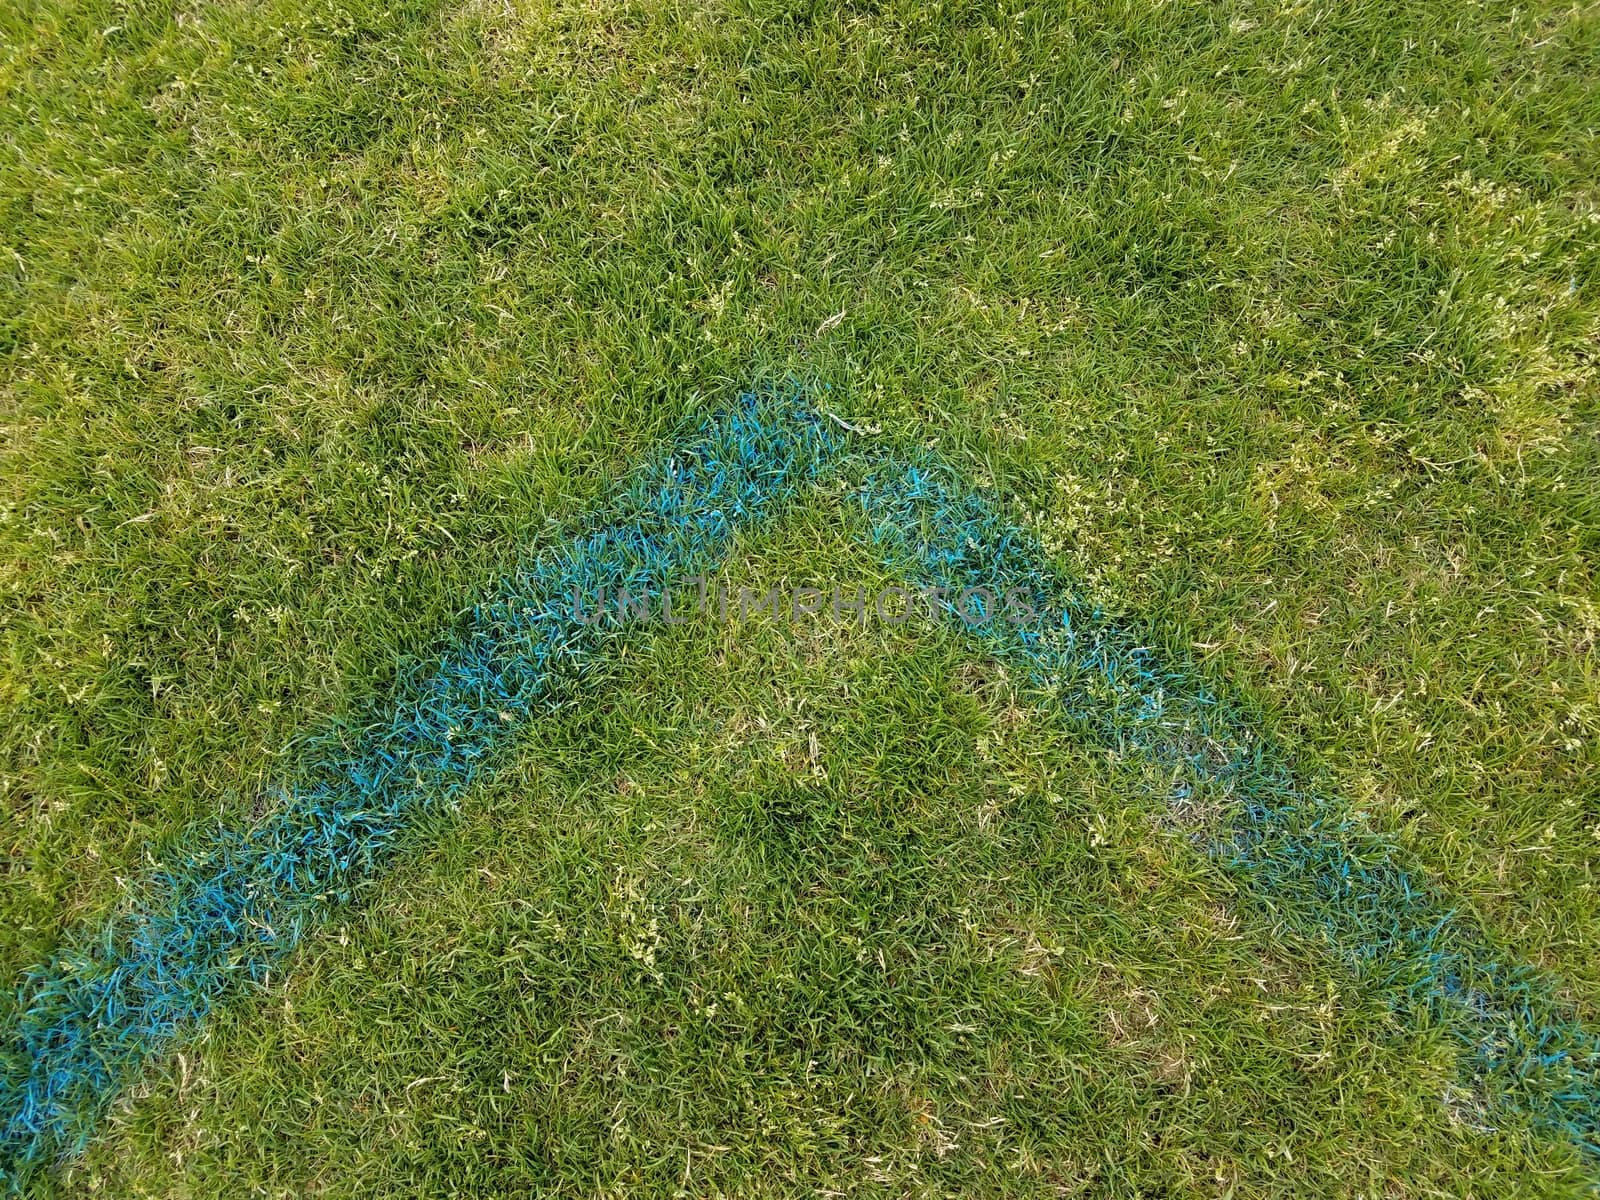 painted blue lines on green grass or lawn by stockphotofan1